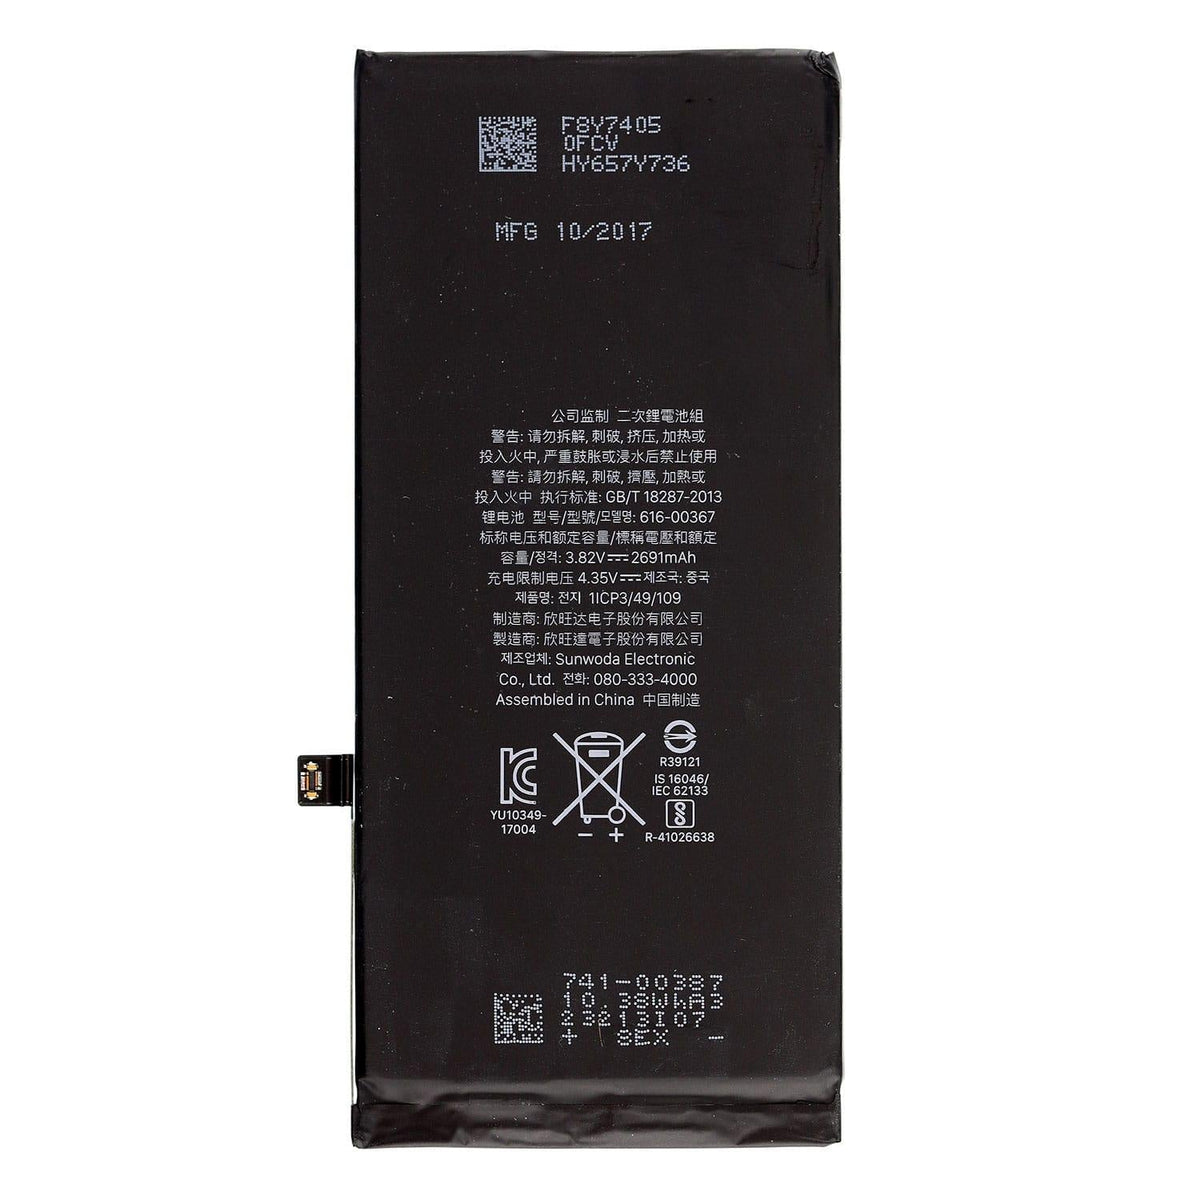 Battery replacement for iPh8 plus